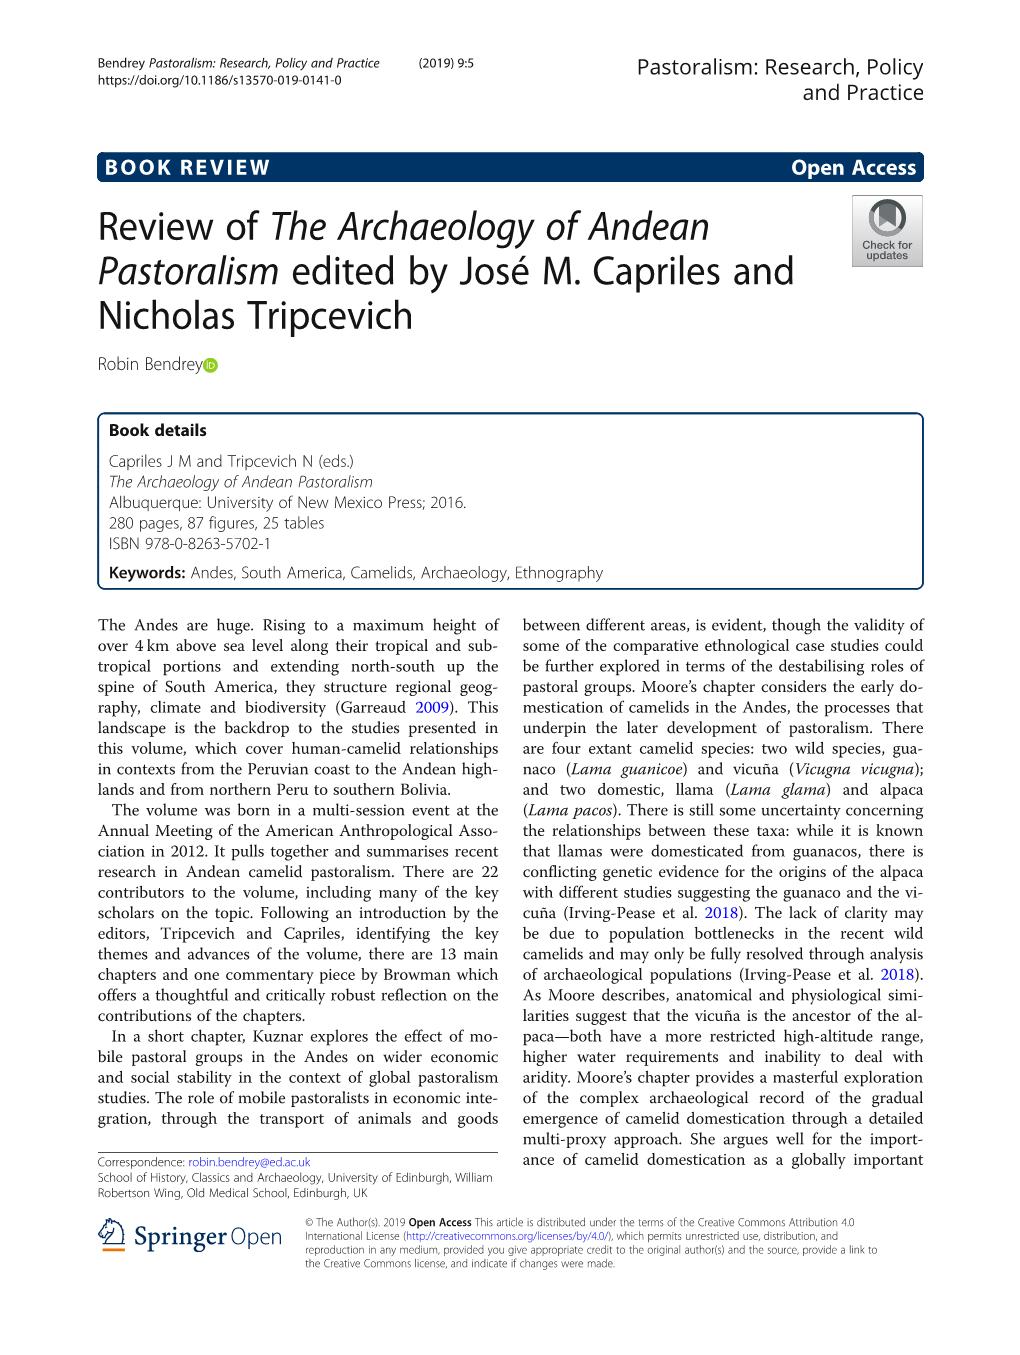 Review of the Archaeology of Andean Pastoralism Edited by José M. Capriles and Nicholas Tripcevich Robin Bendrey